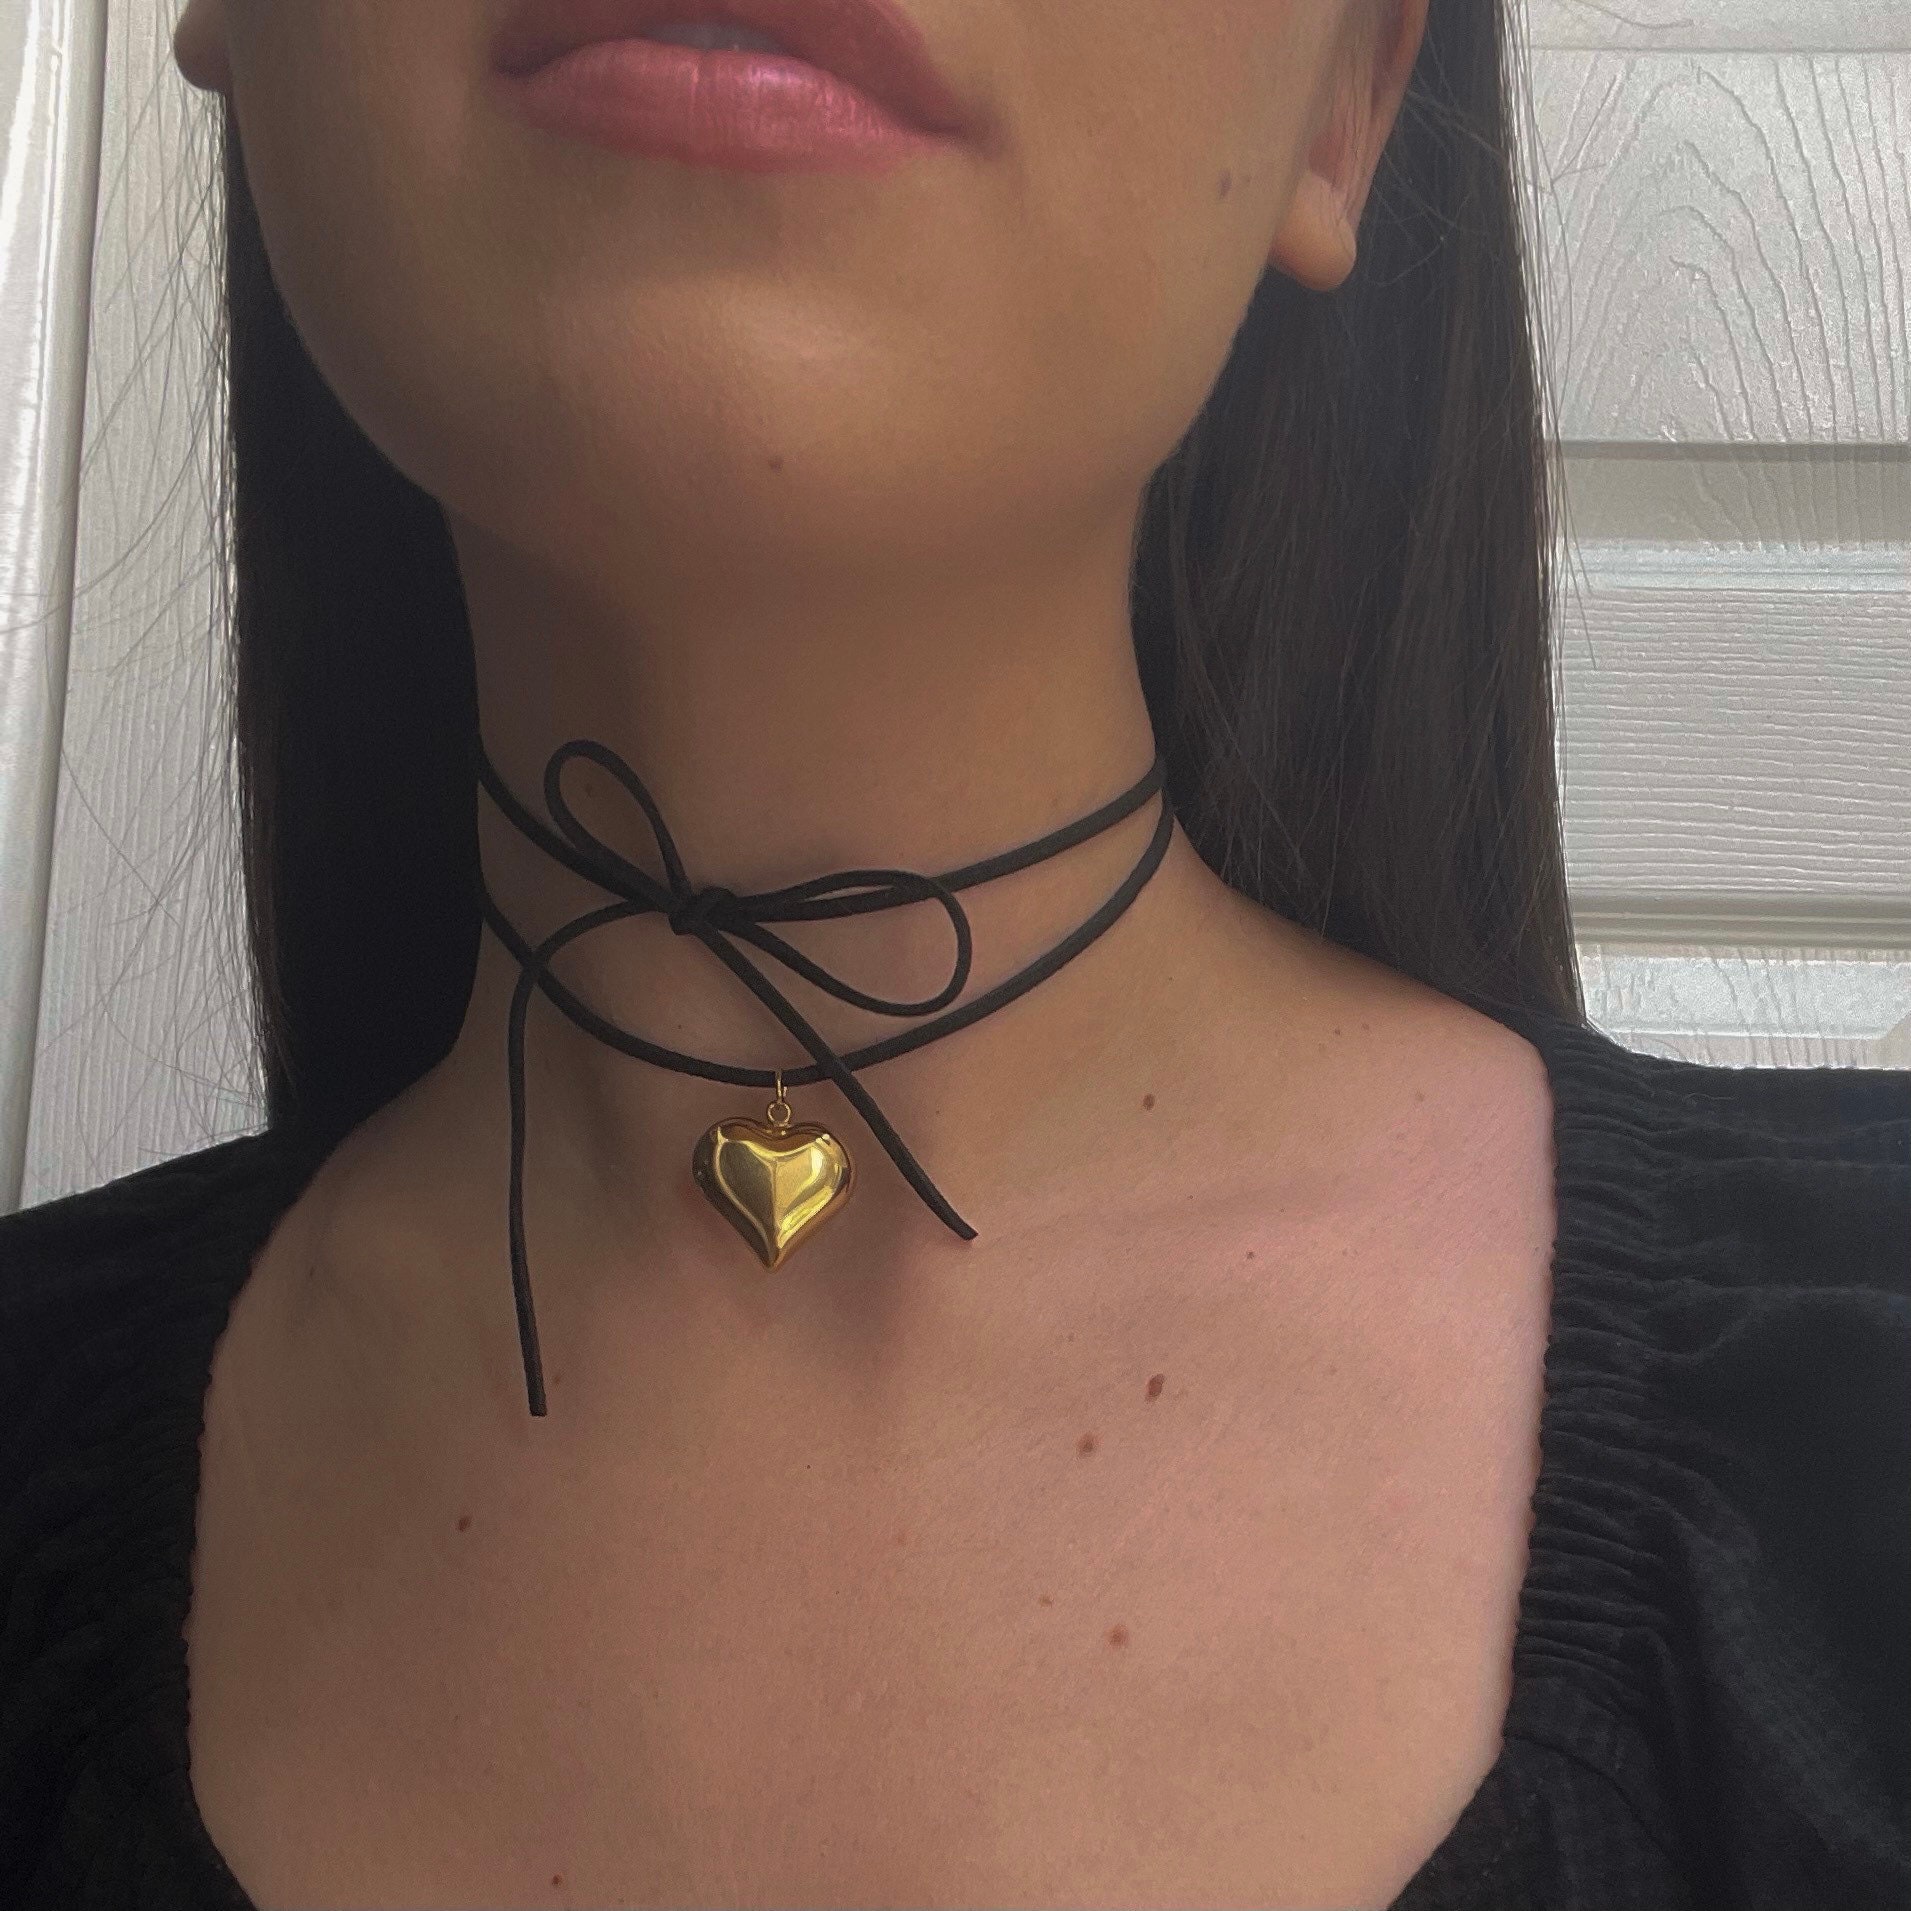 Gold Silver Puffy Heart Leather Black Suede Cord Necklace String Puffy Heart  Stainless Steel Chunky Y2K Unisex Jewelry Wrap Choker Keachains - Etsy